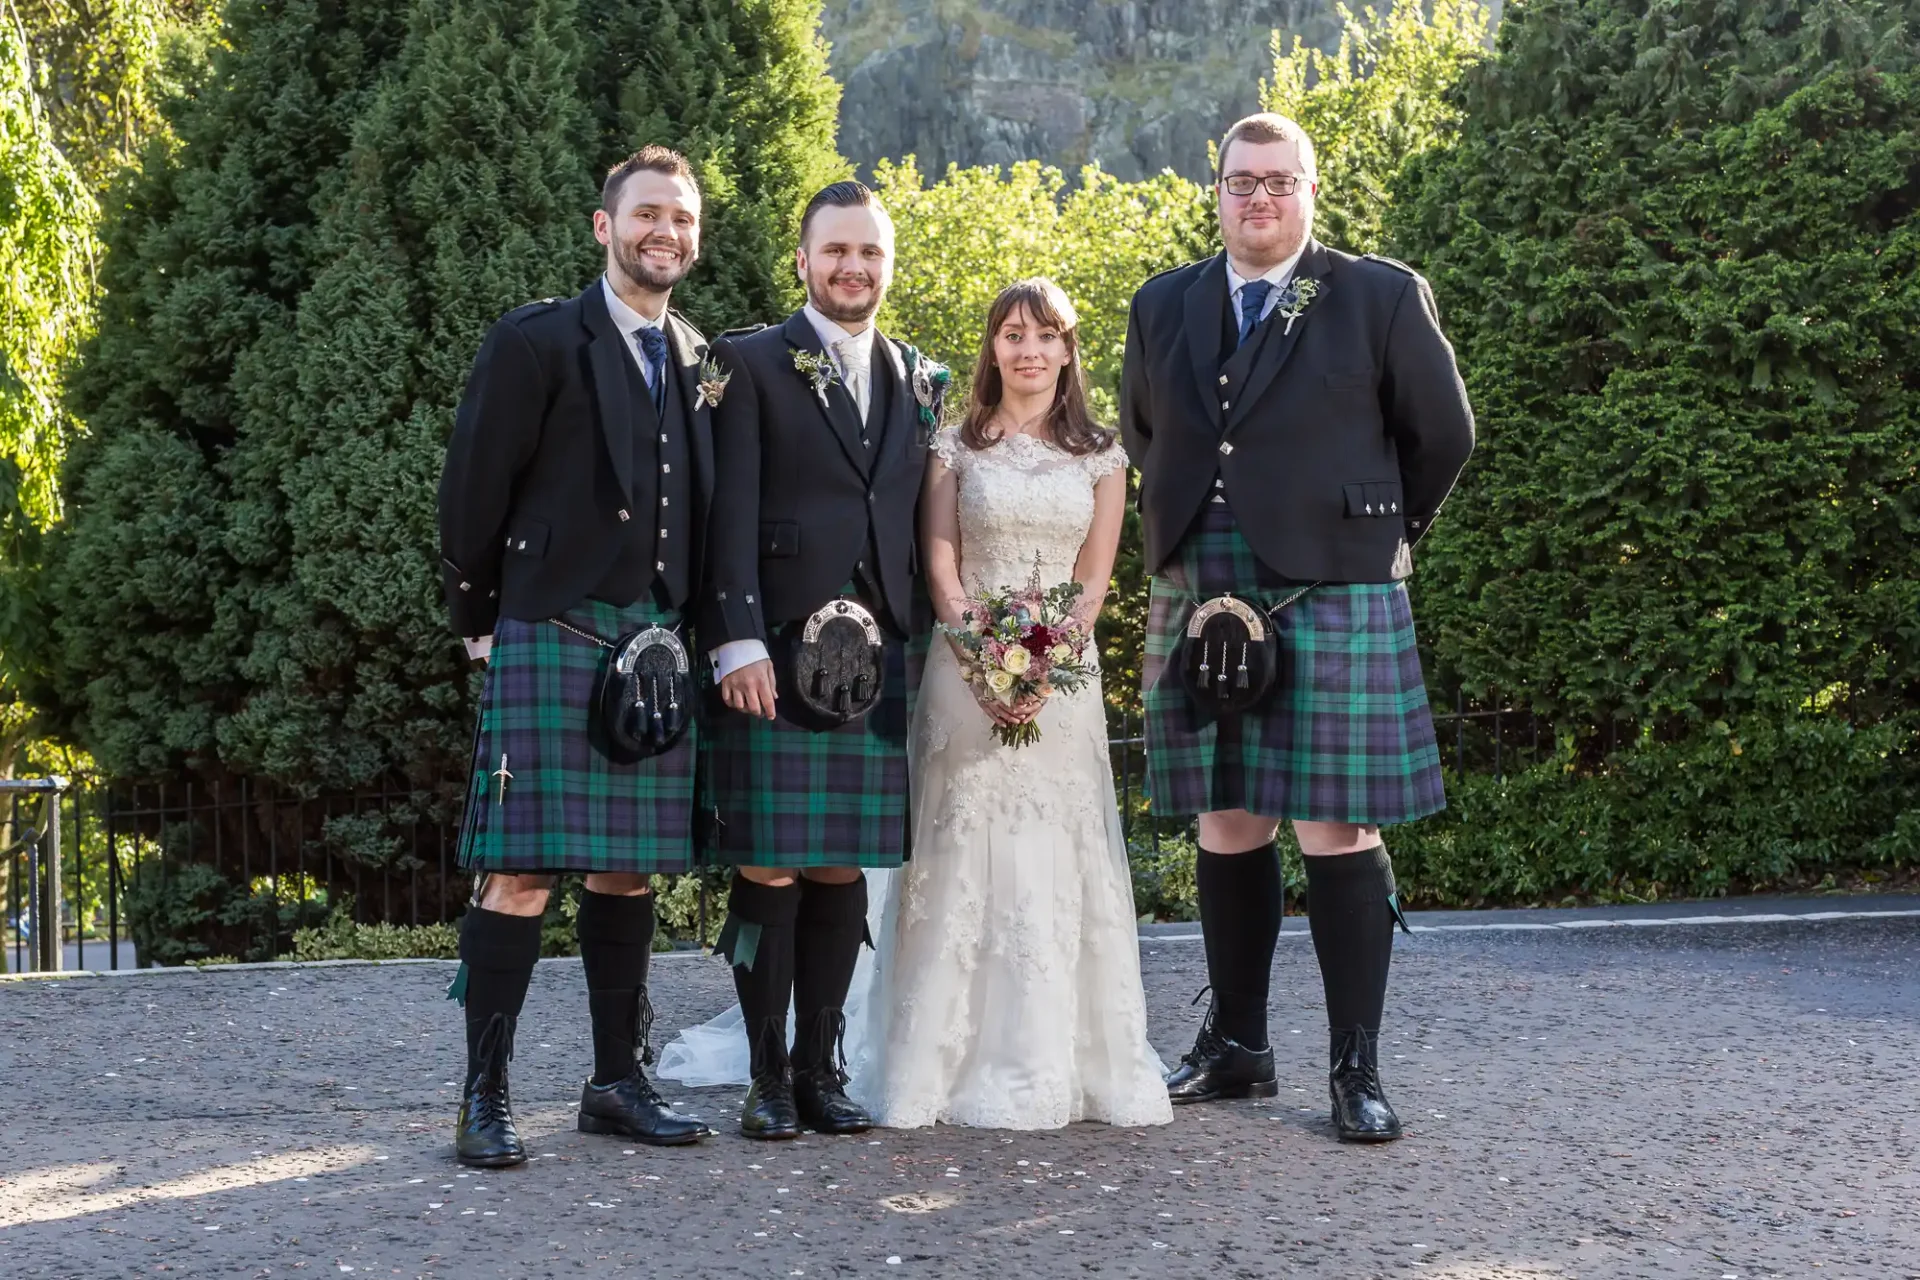 A bride in a white lace gown and three men in traditional scottish kilts and jackets, posing together outdoors.